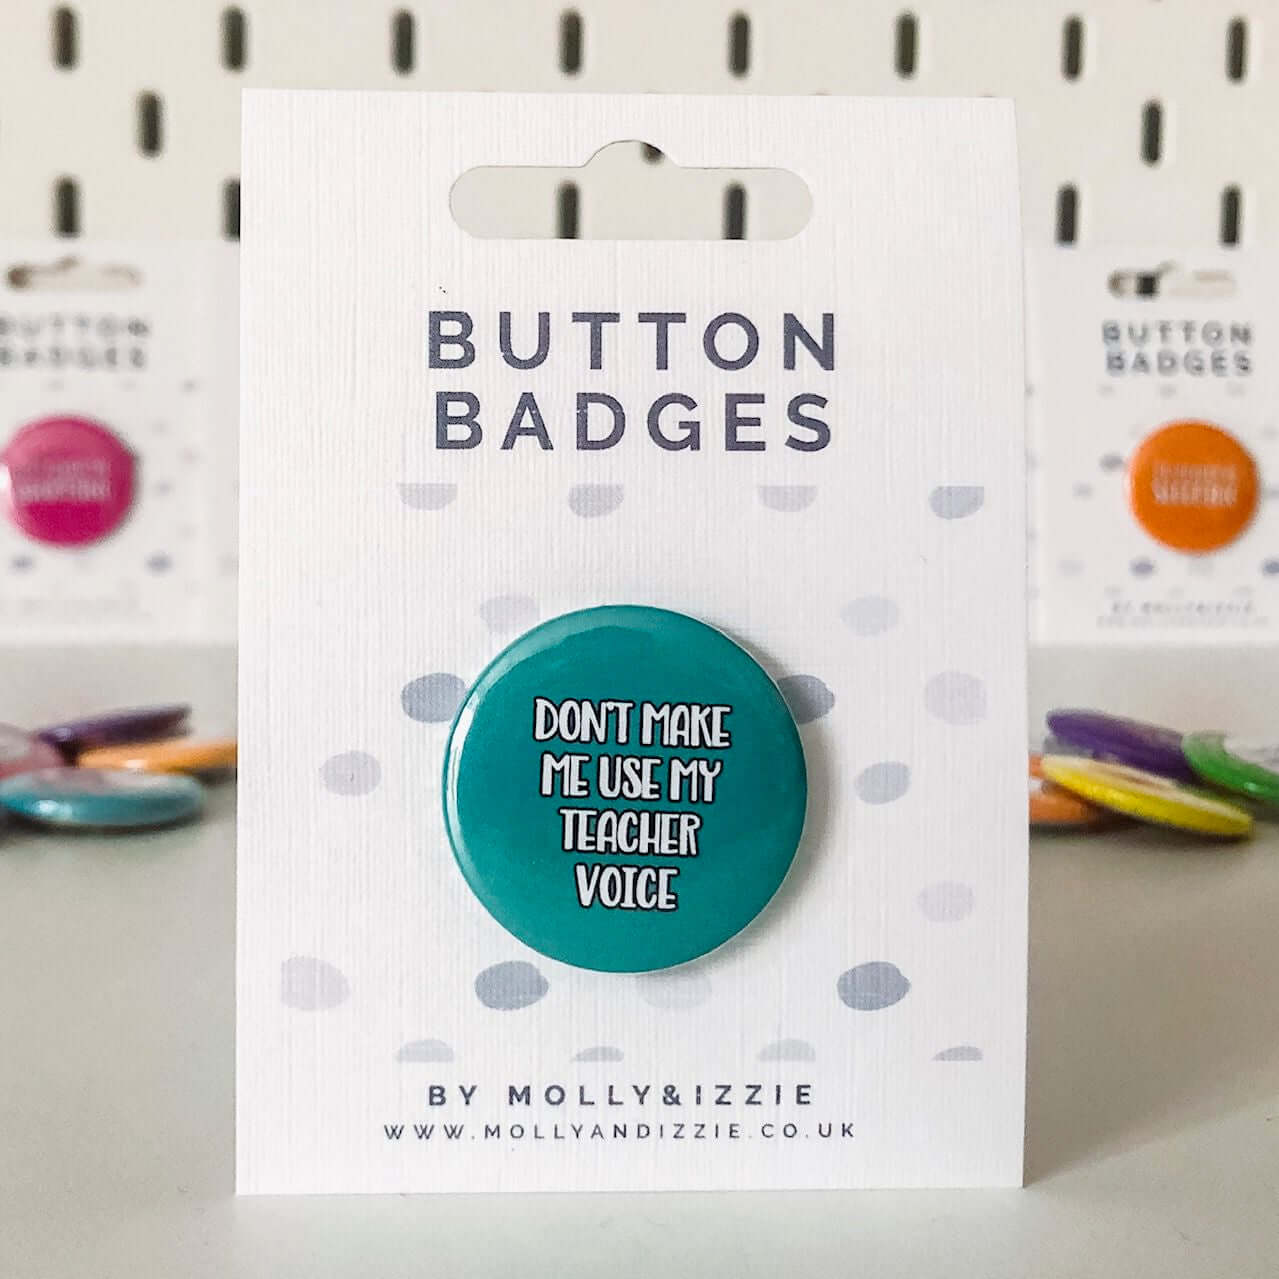 by Molly & Izzie Don't Make Me Use My Teacher Voice Button Badge Button Badge By Molly & Izzie